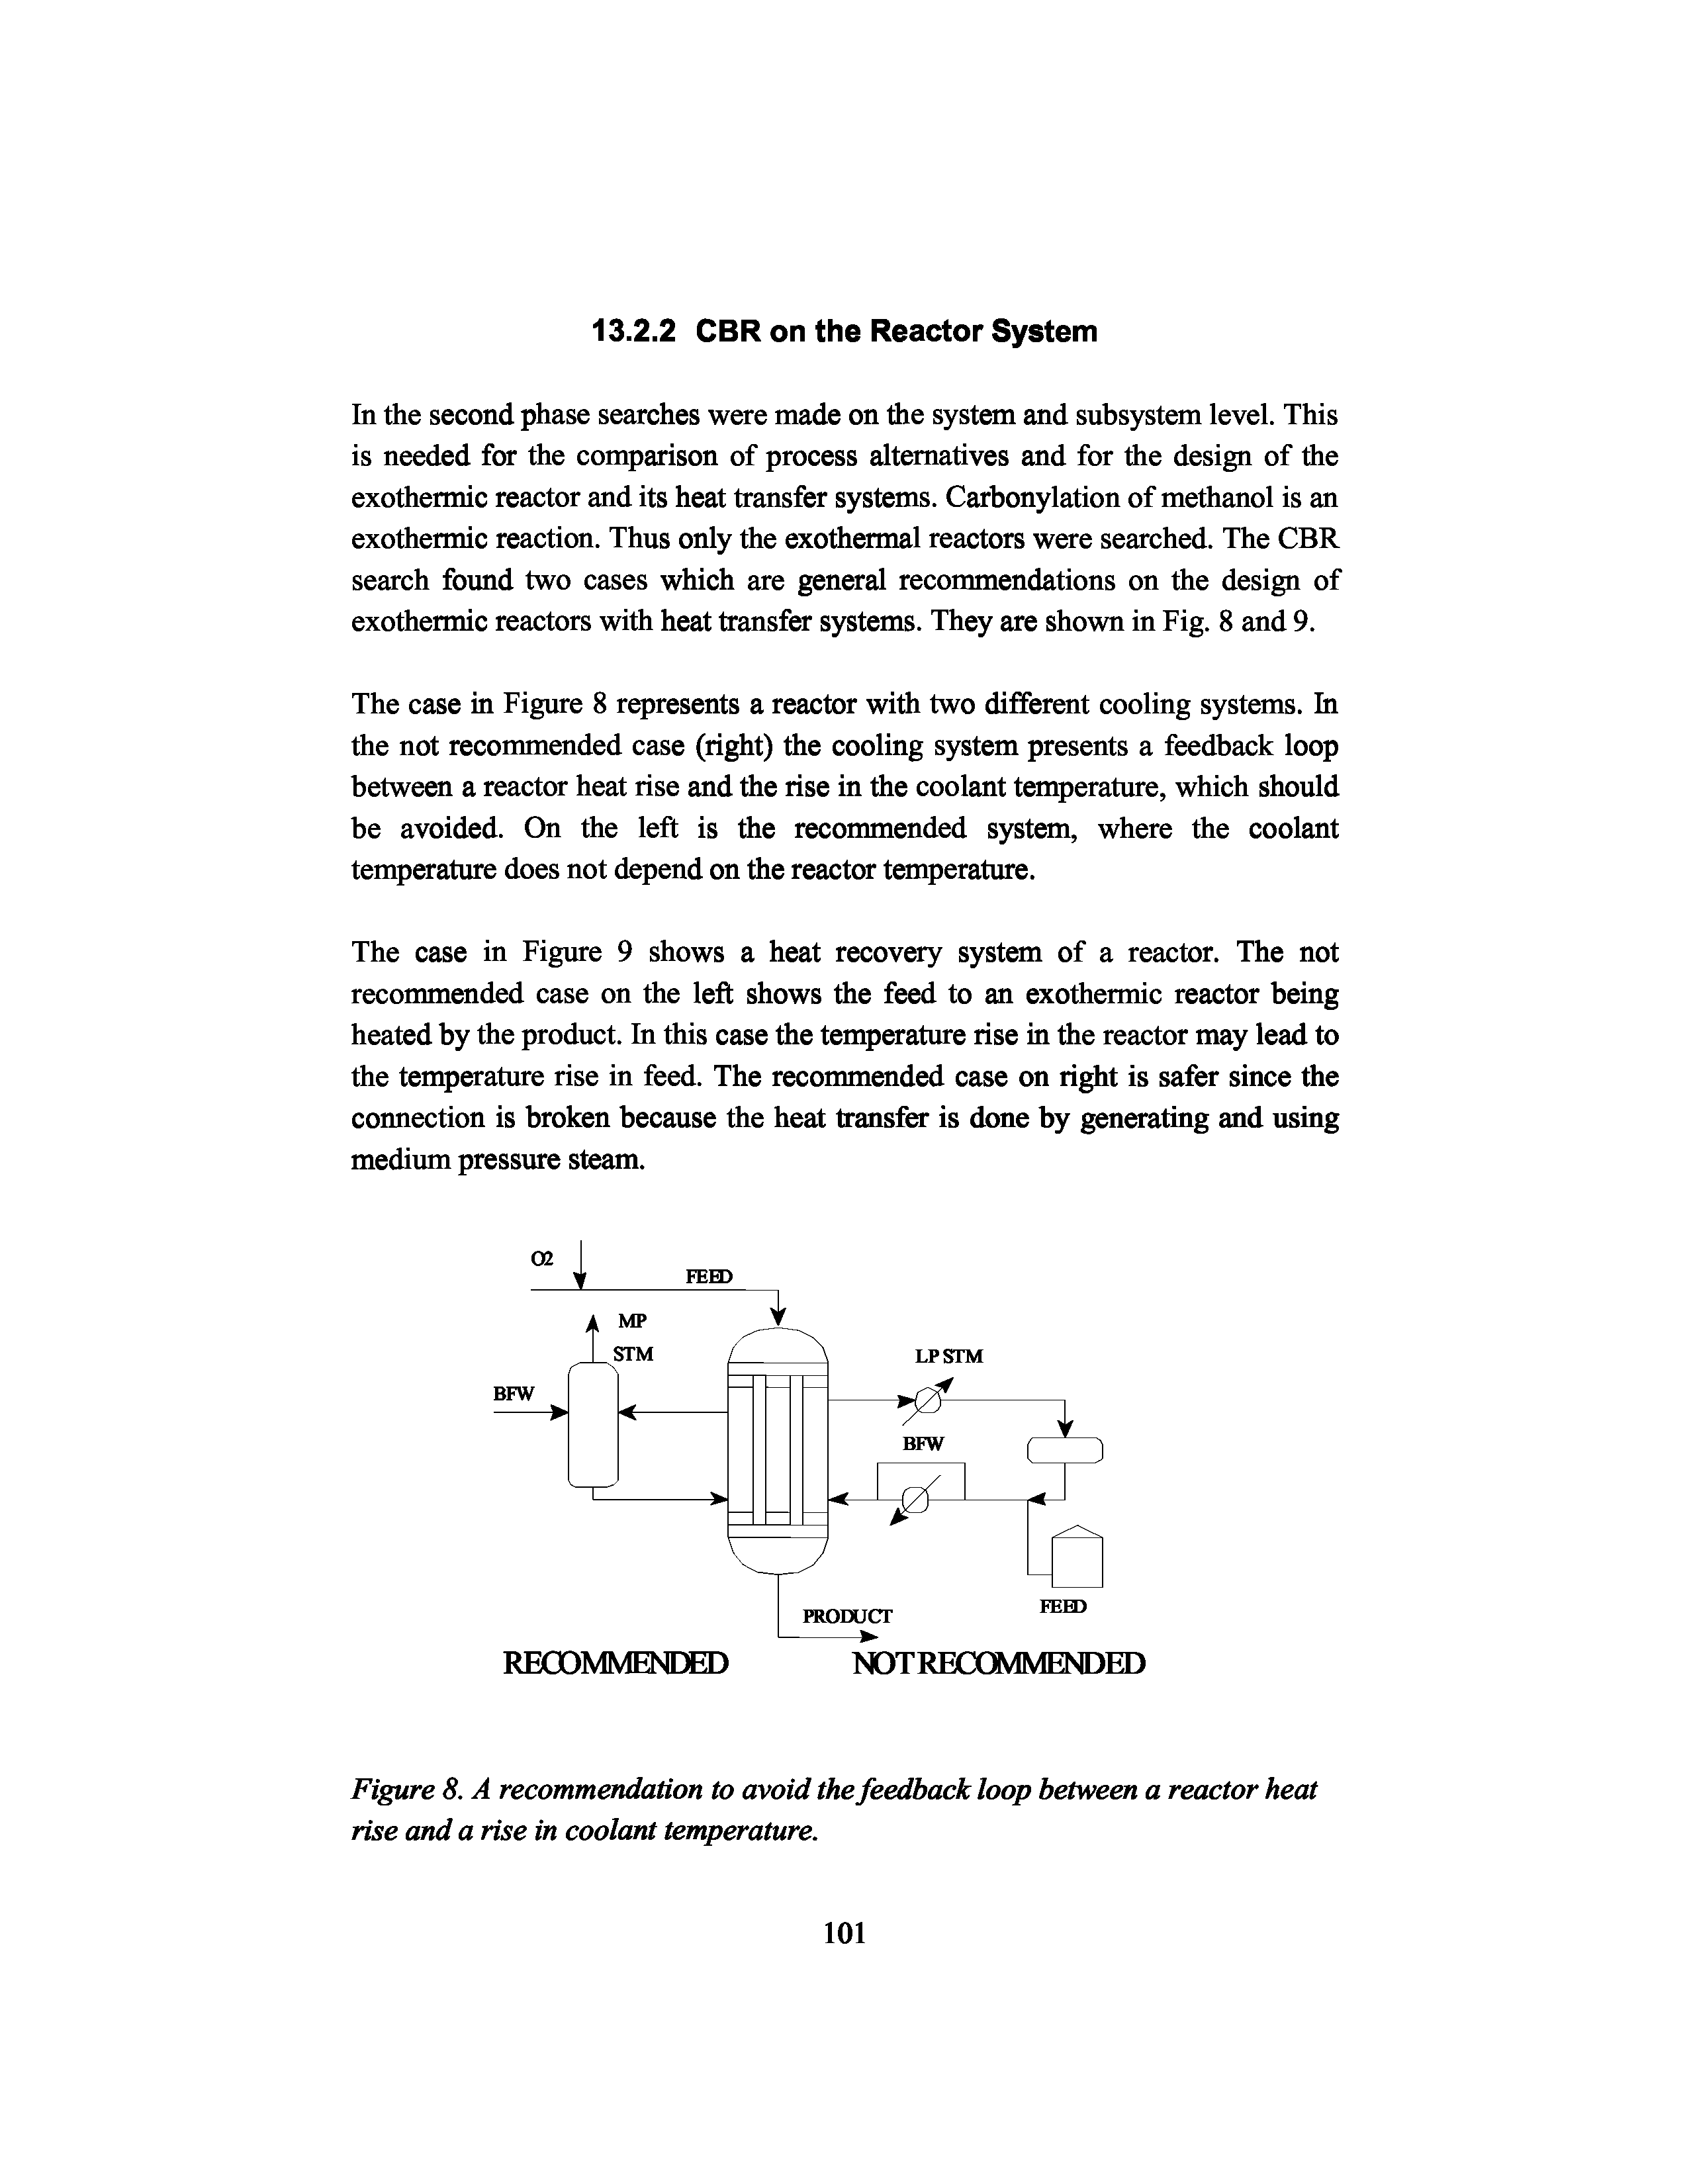 Figure 8. A recommendation to avoid the feedback loop between a reactor heat rise and a rise in coolant temperature.